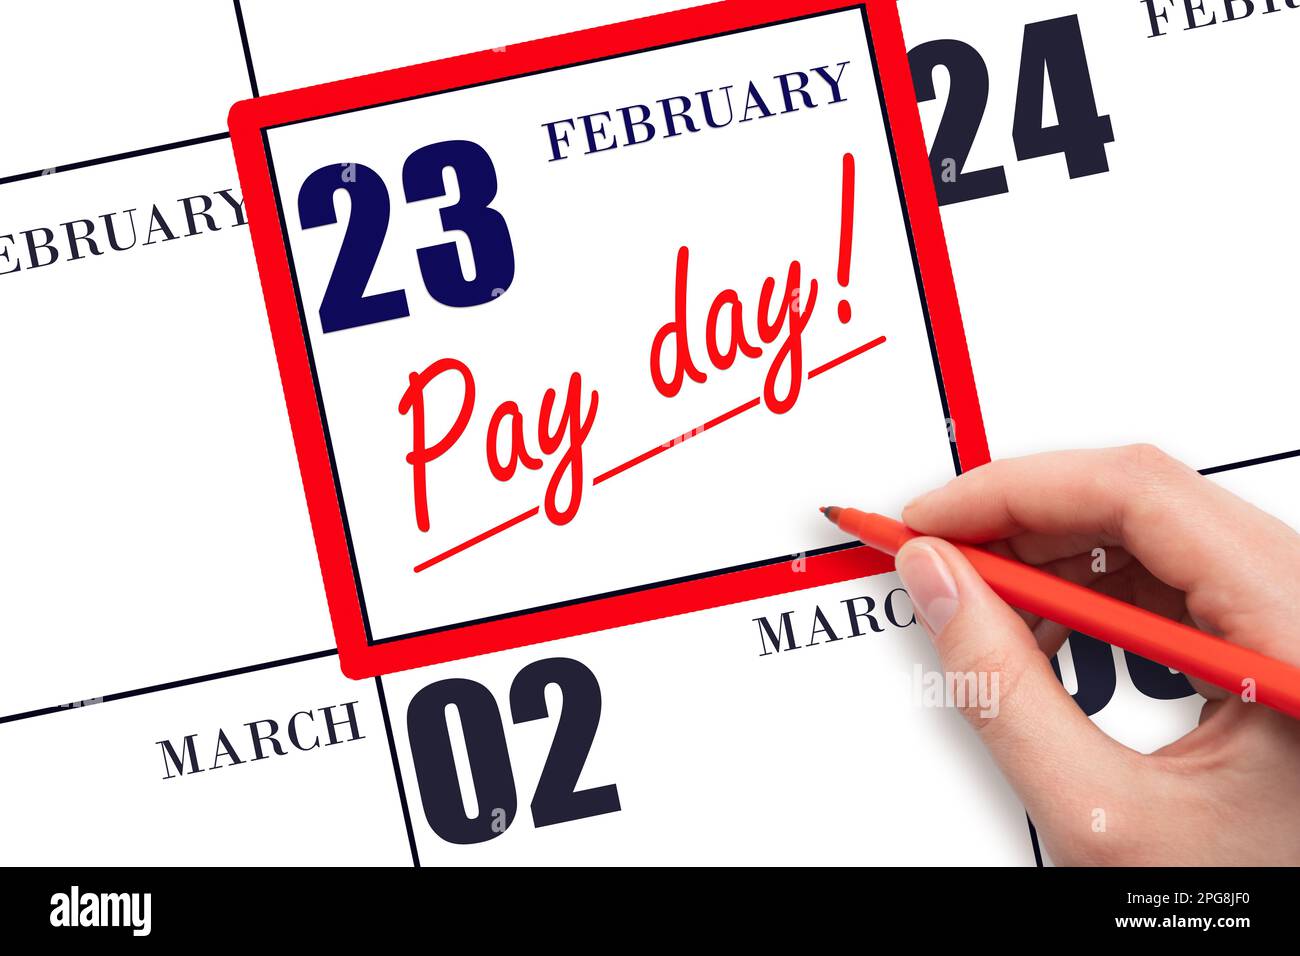 23rd day of February. Hand writing text PAY DATE on calendar date February 23 and underline it. Payment due date. Reminder concept of payment. Winter Stock Photo